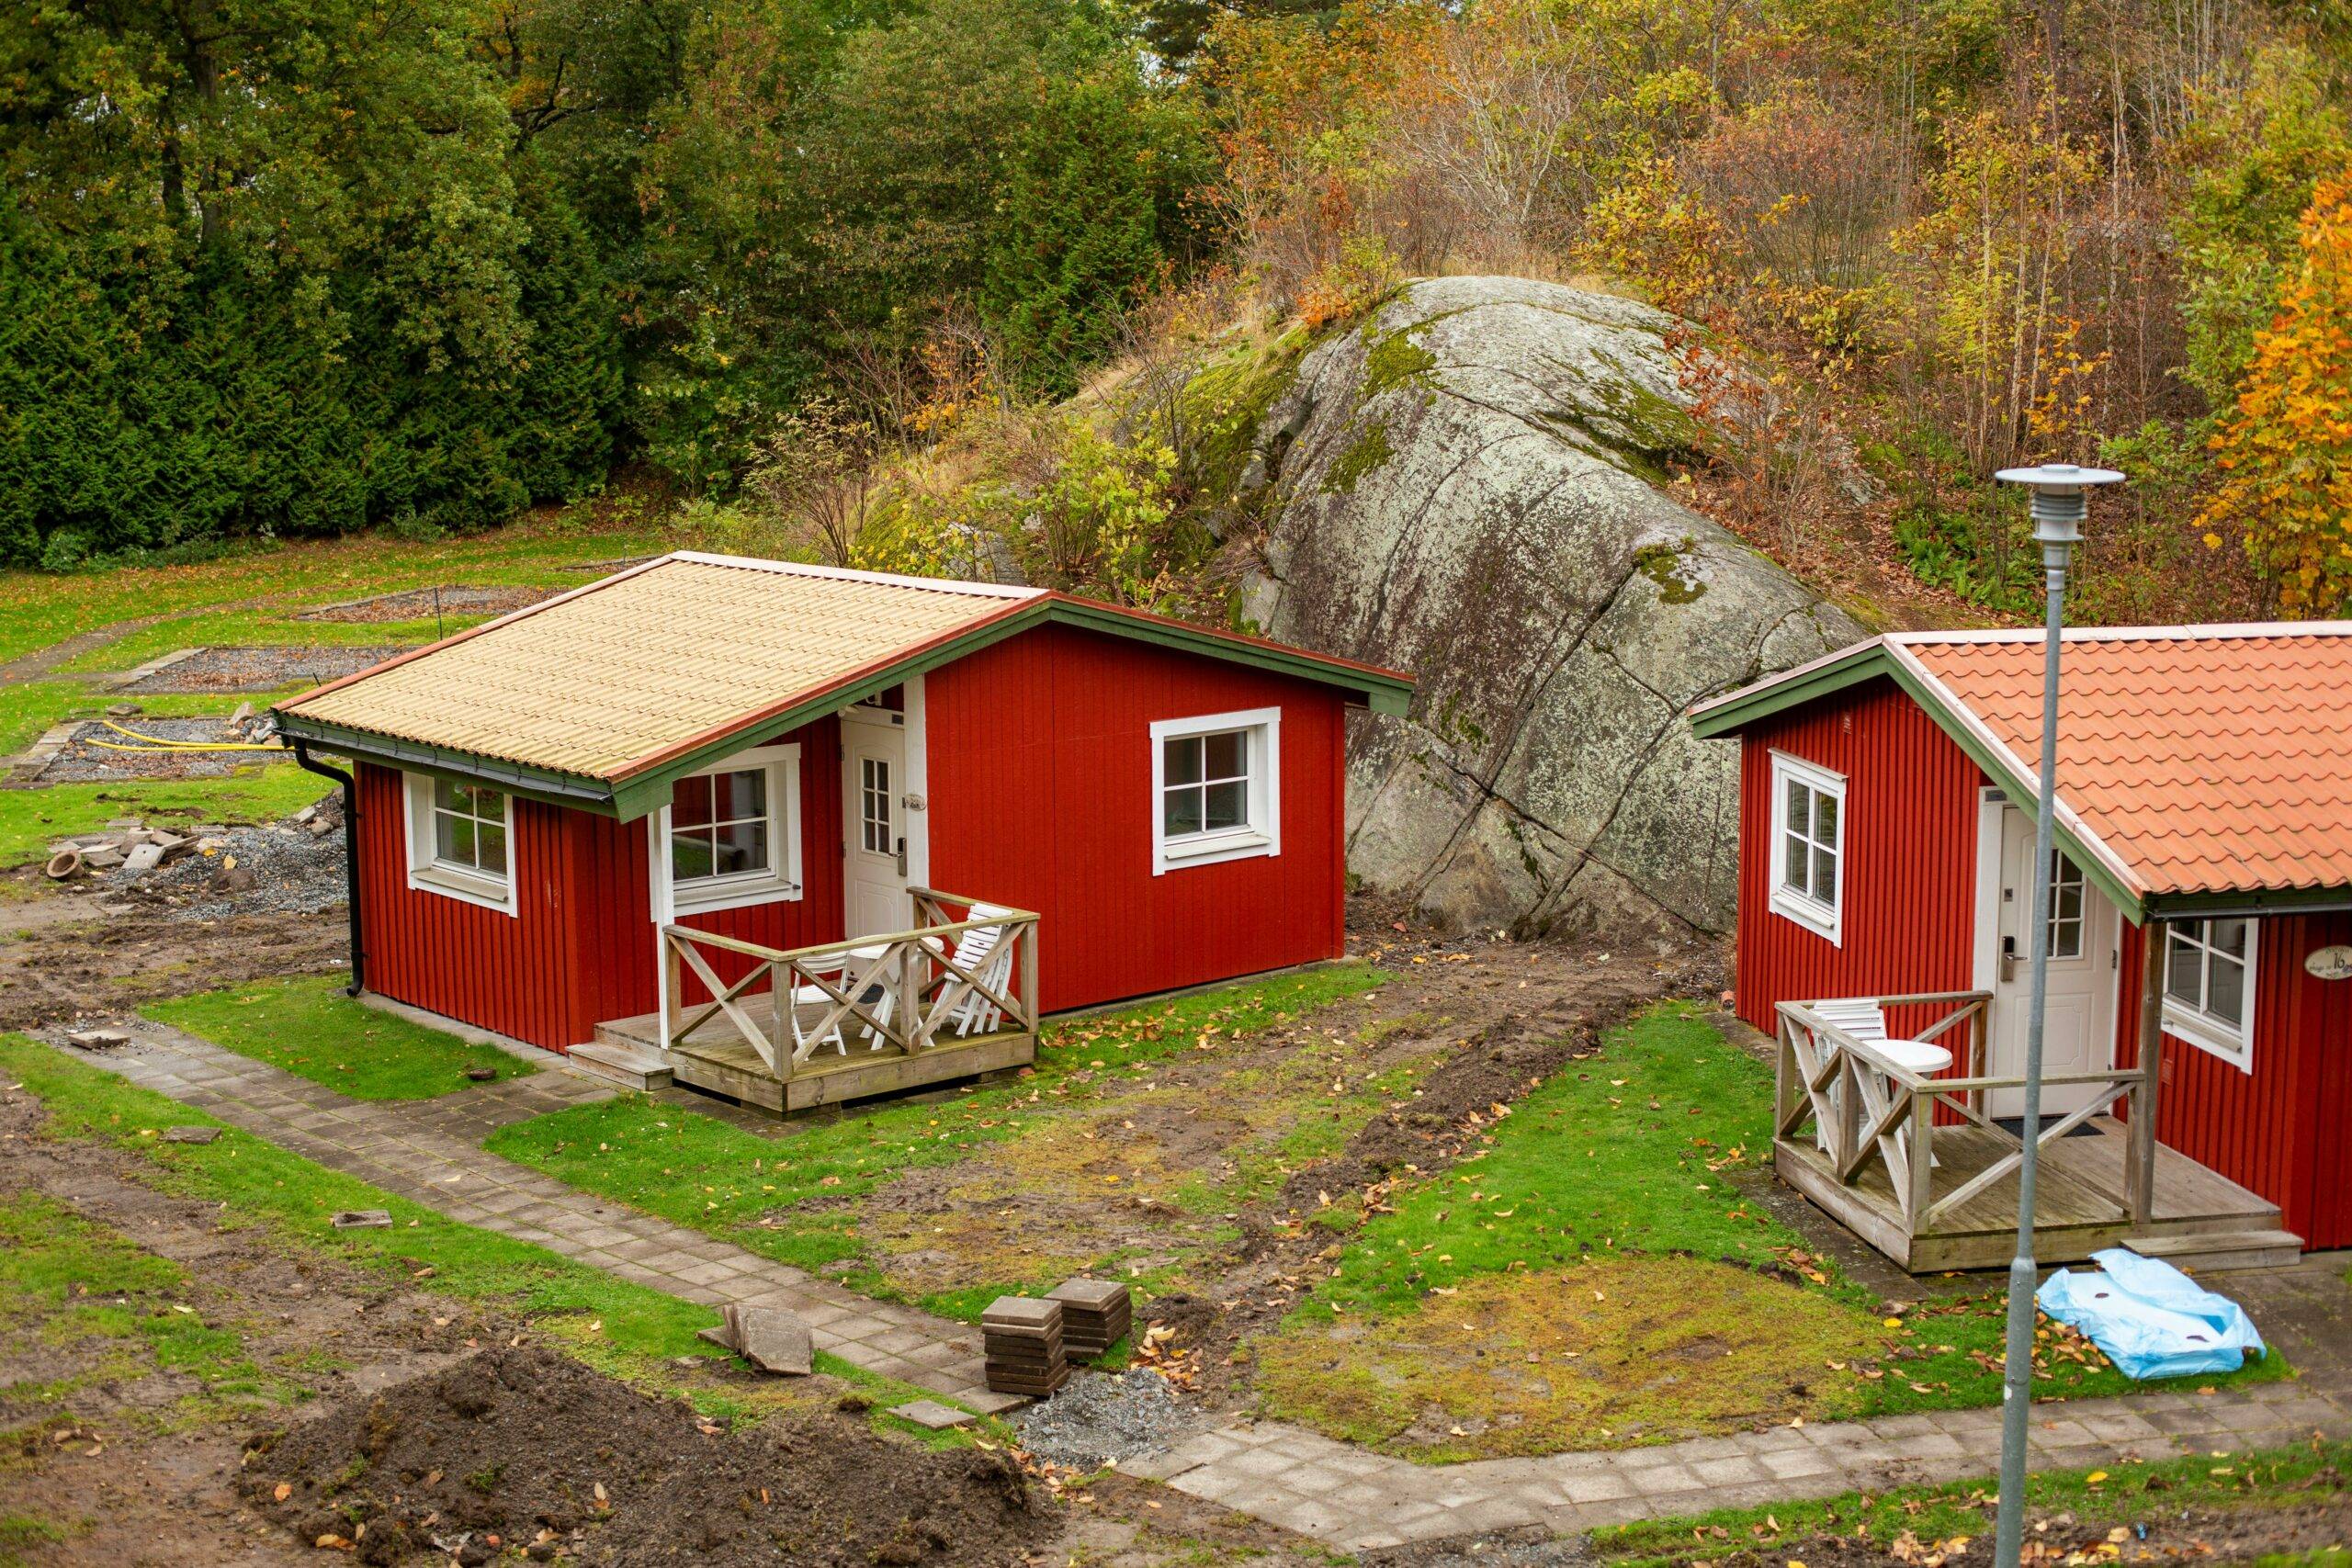 Cozy red cottage in Grönskara, Småland, serviced by Småland Holiday Home Care, nestled in a lush autumn landscape, showcasing local Swedish charm and care excellence.